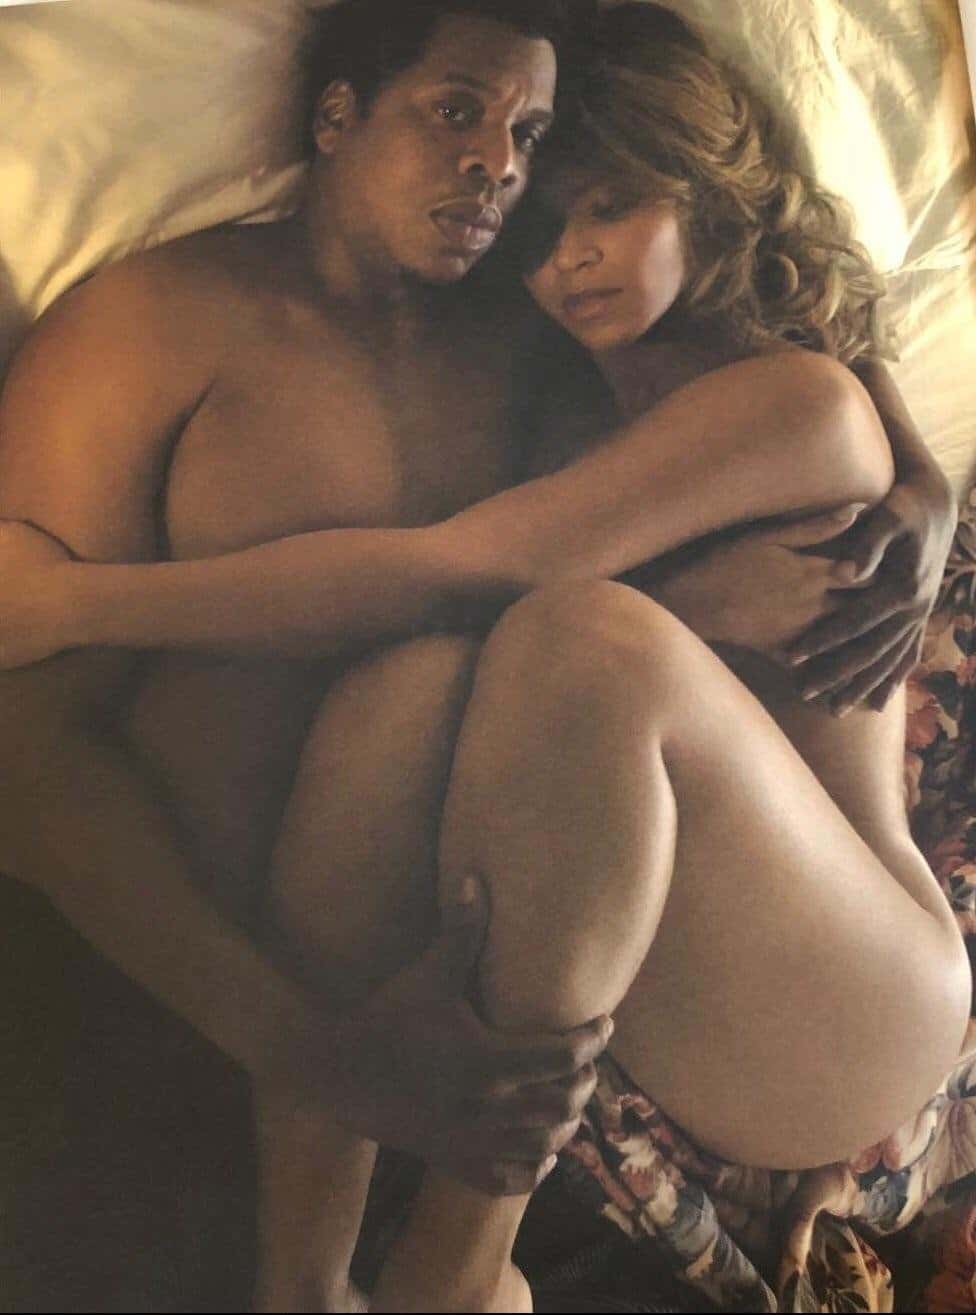 The S. reccomend beyonce naked